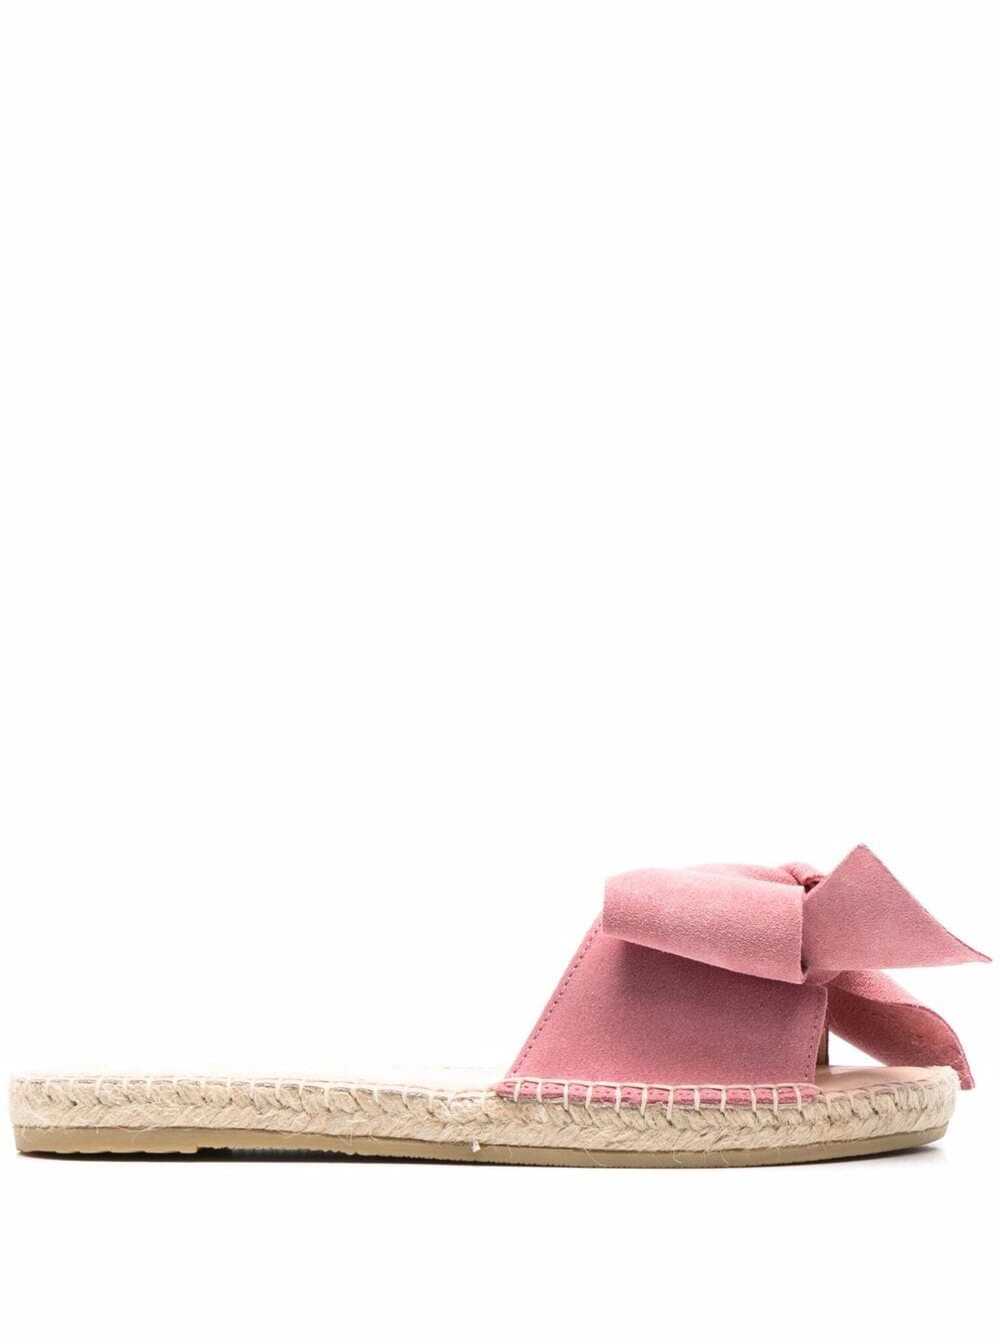 Manebi Womans Hamptons Pink Suede Flat Sandals With Bow